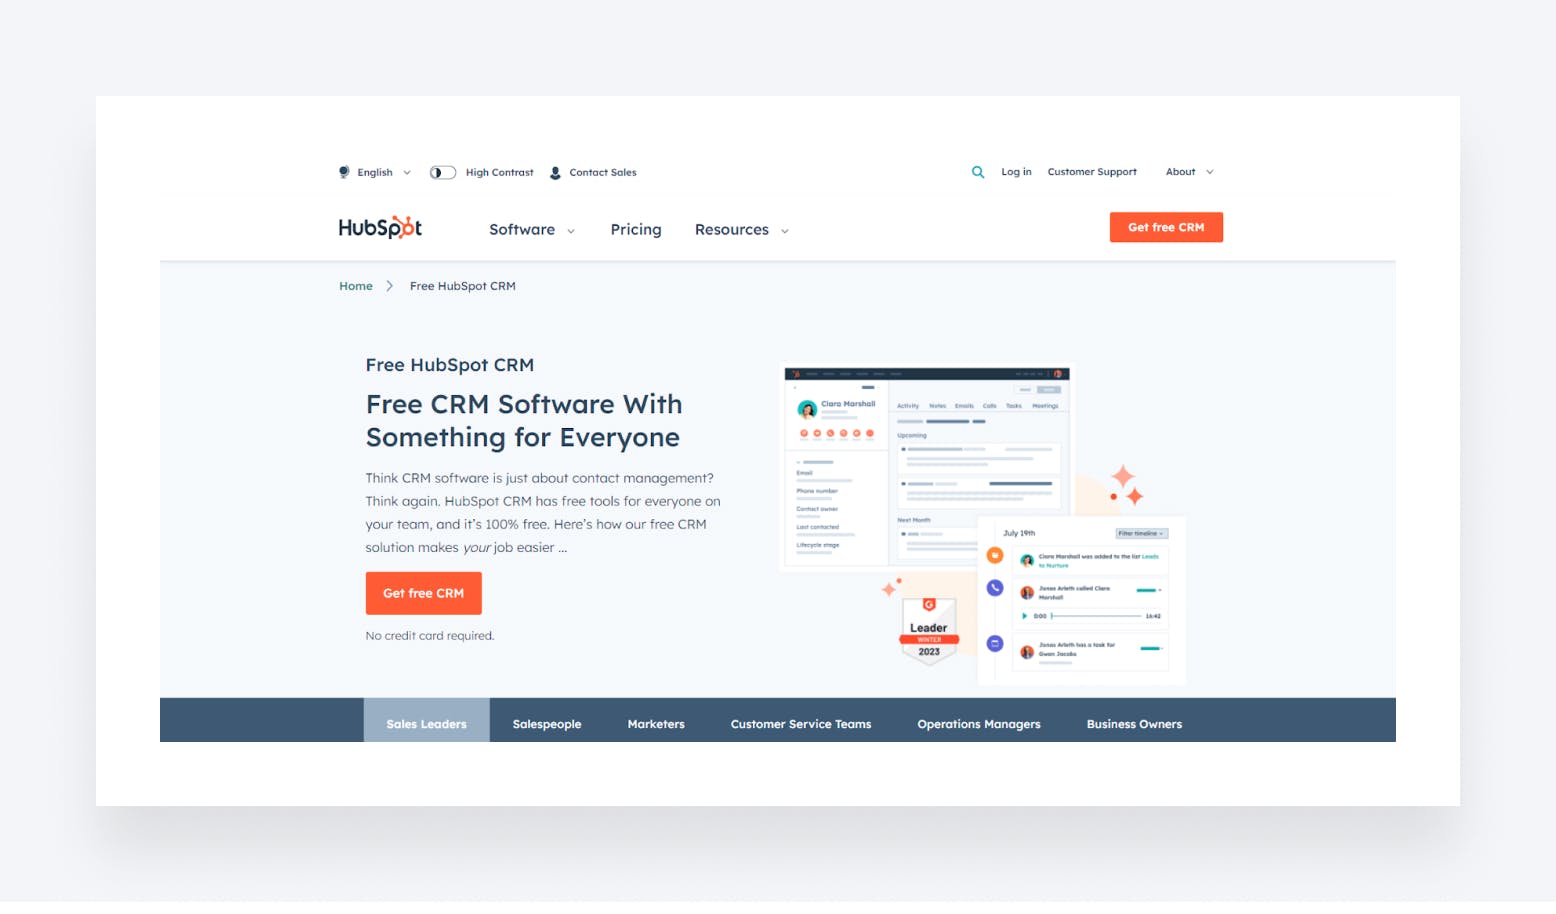 Hubspot’s CRM page